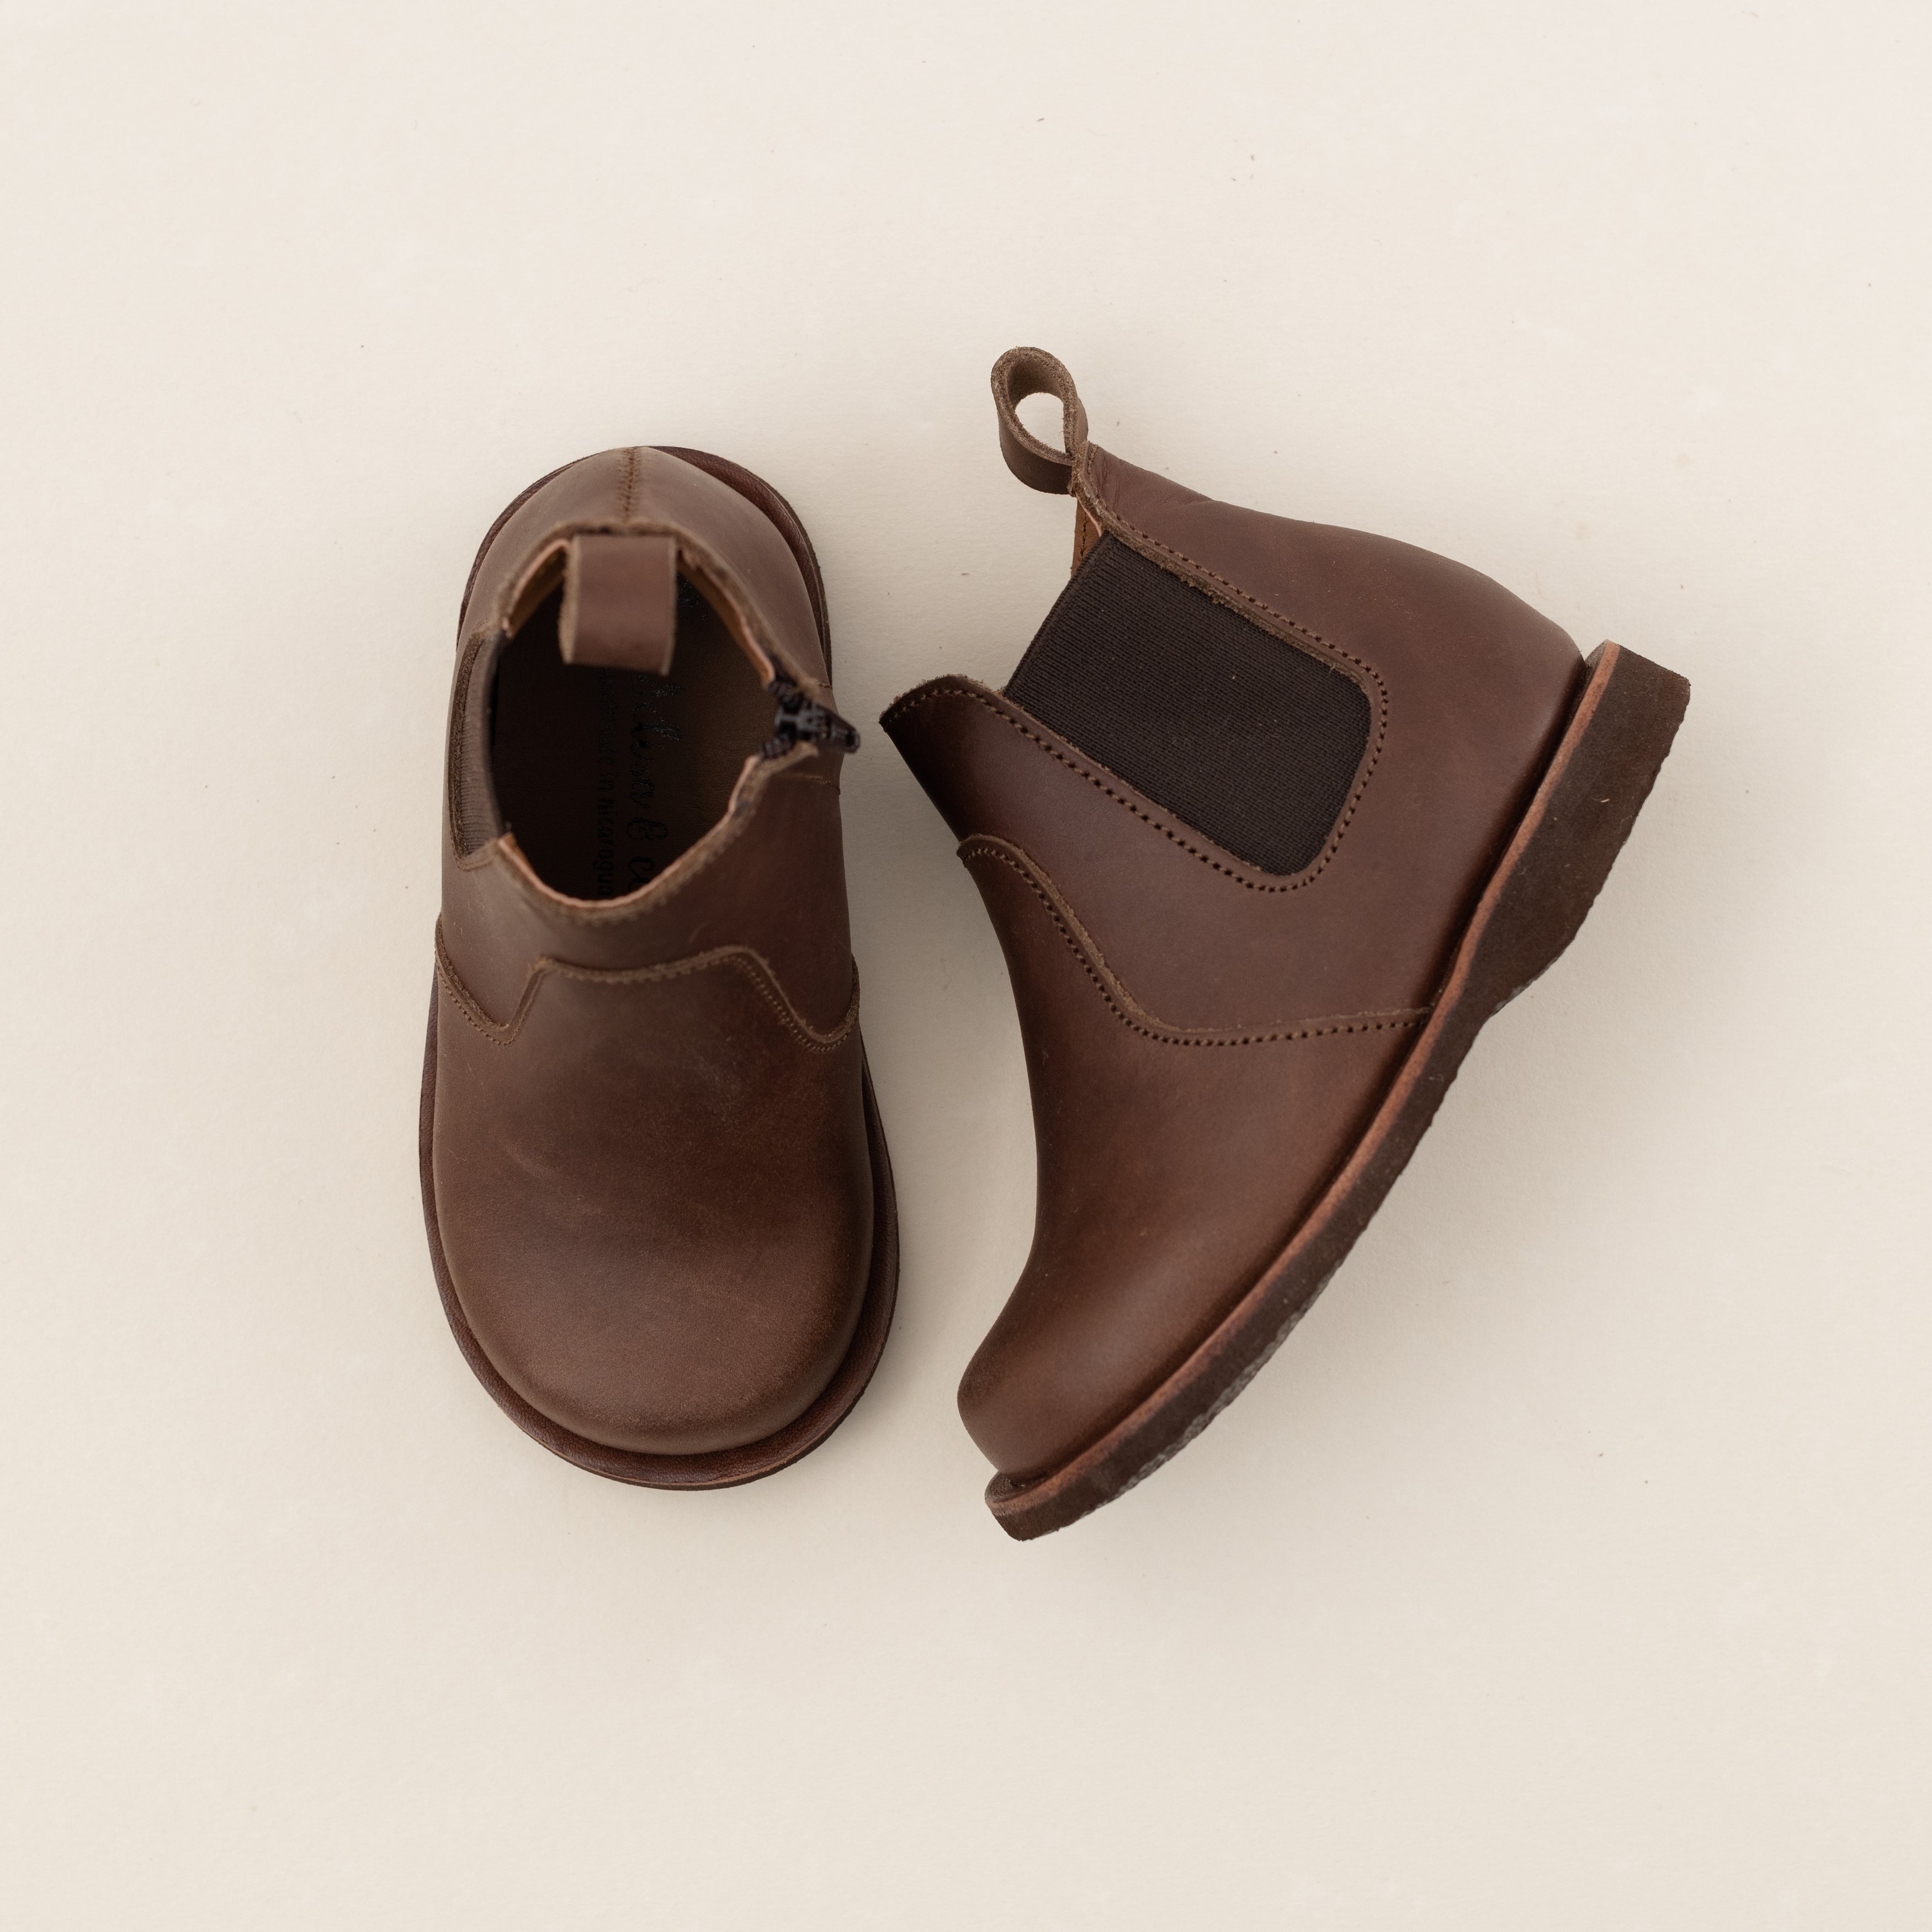 Dark brown leather Chelsea boots for children. Unisex style.